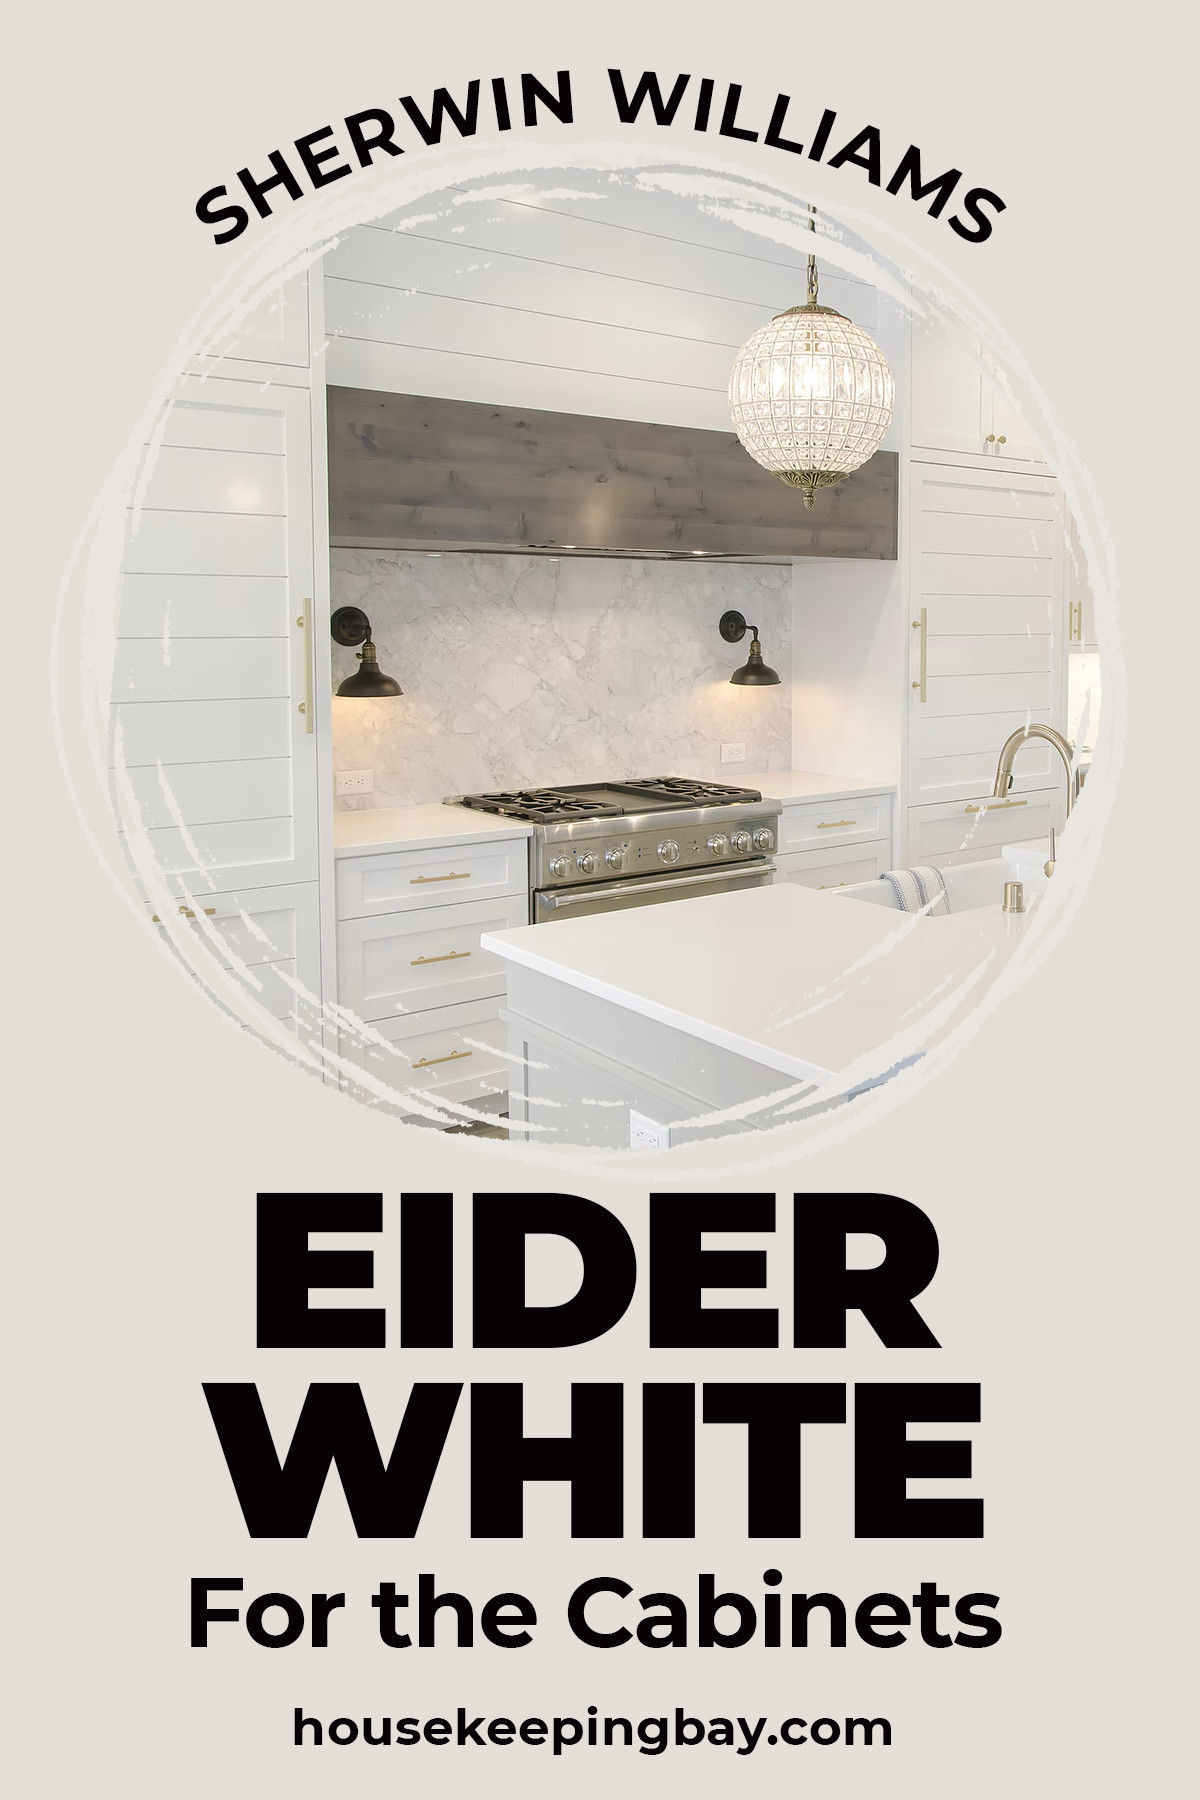 Sherwin Williams Eider White For the cabinets